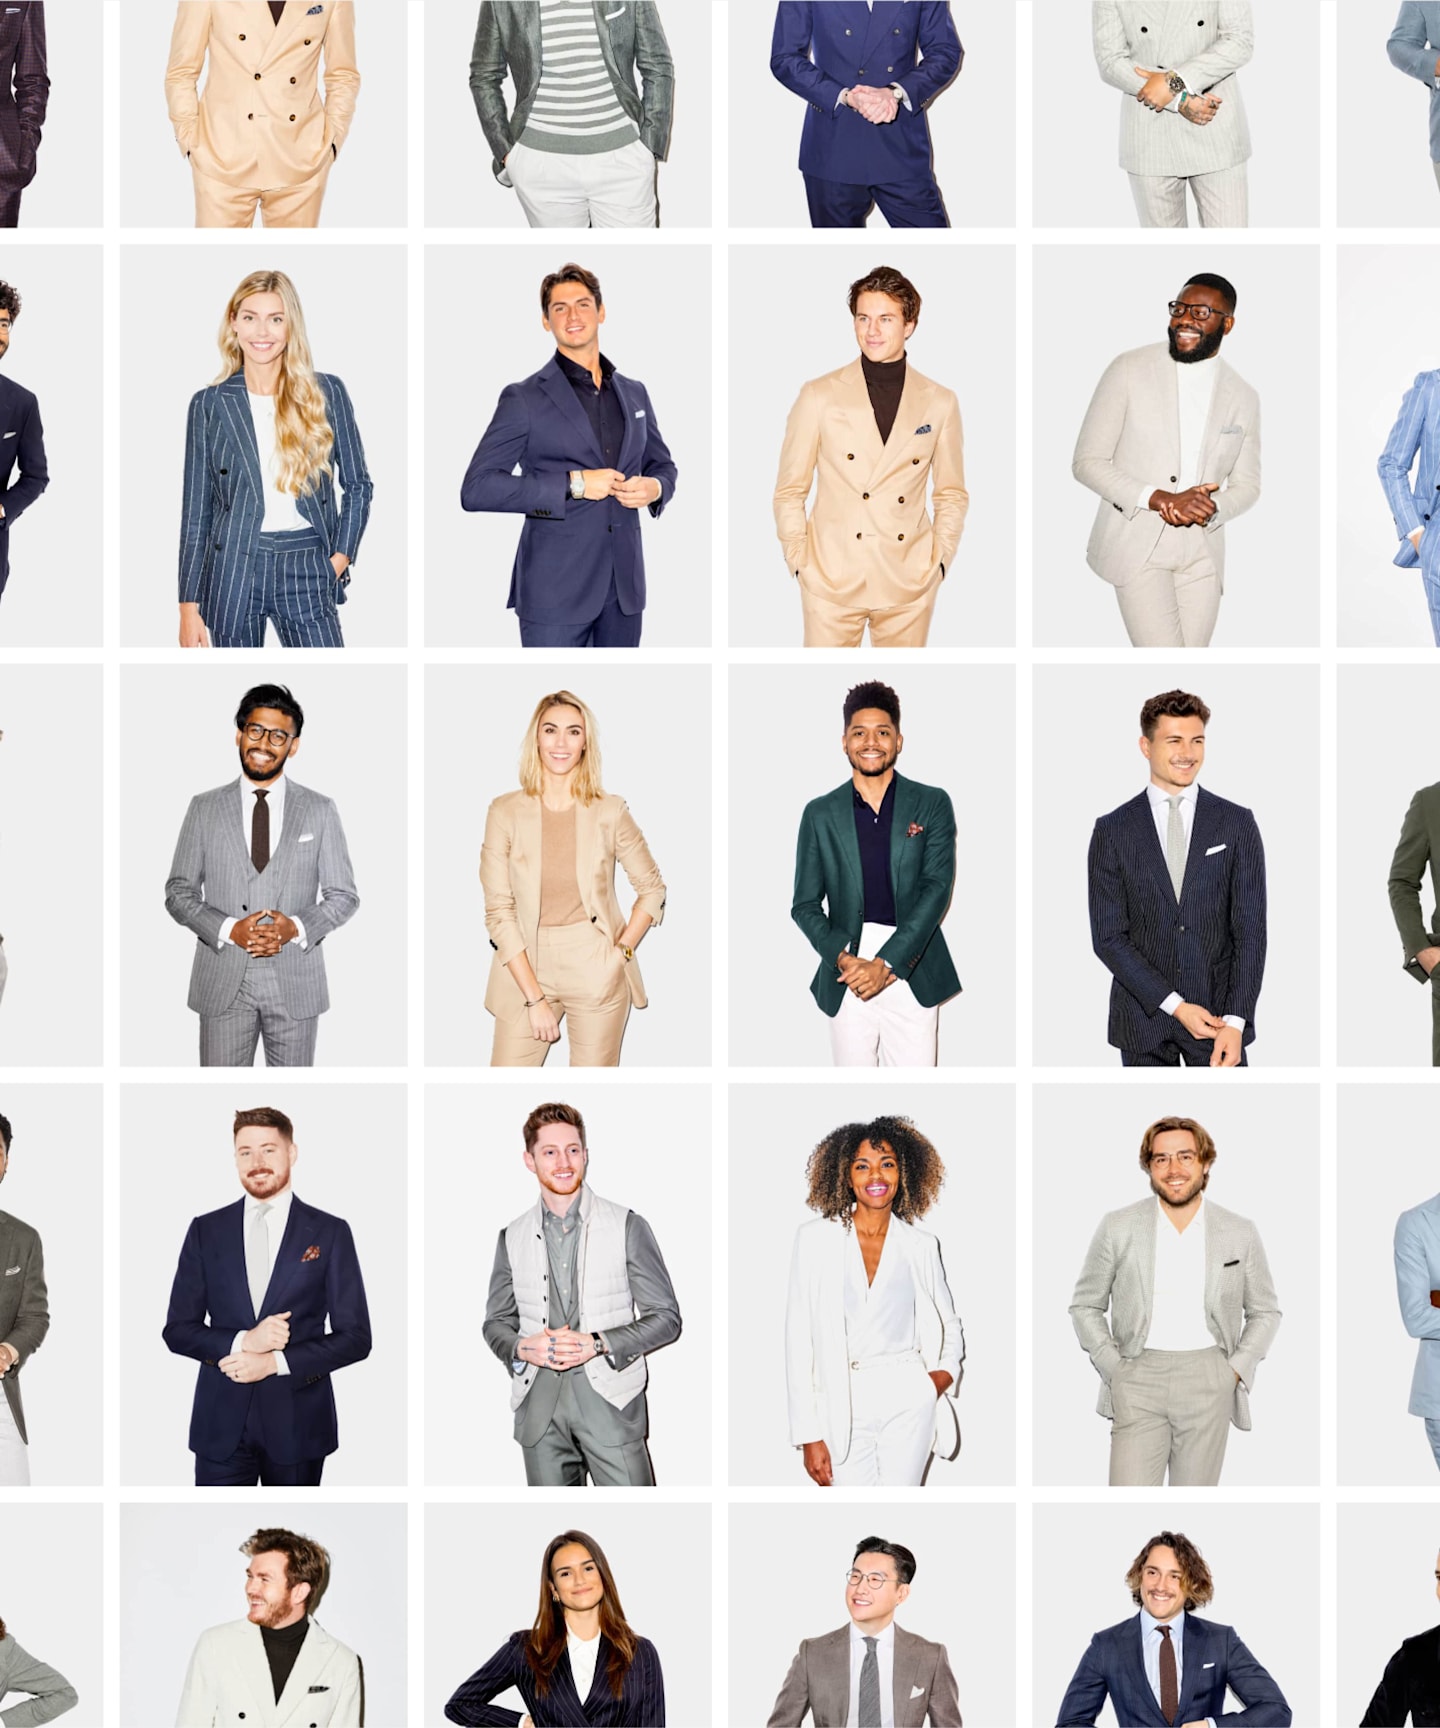 Panorama des conseillers styles des boutiques Suitsupply.